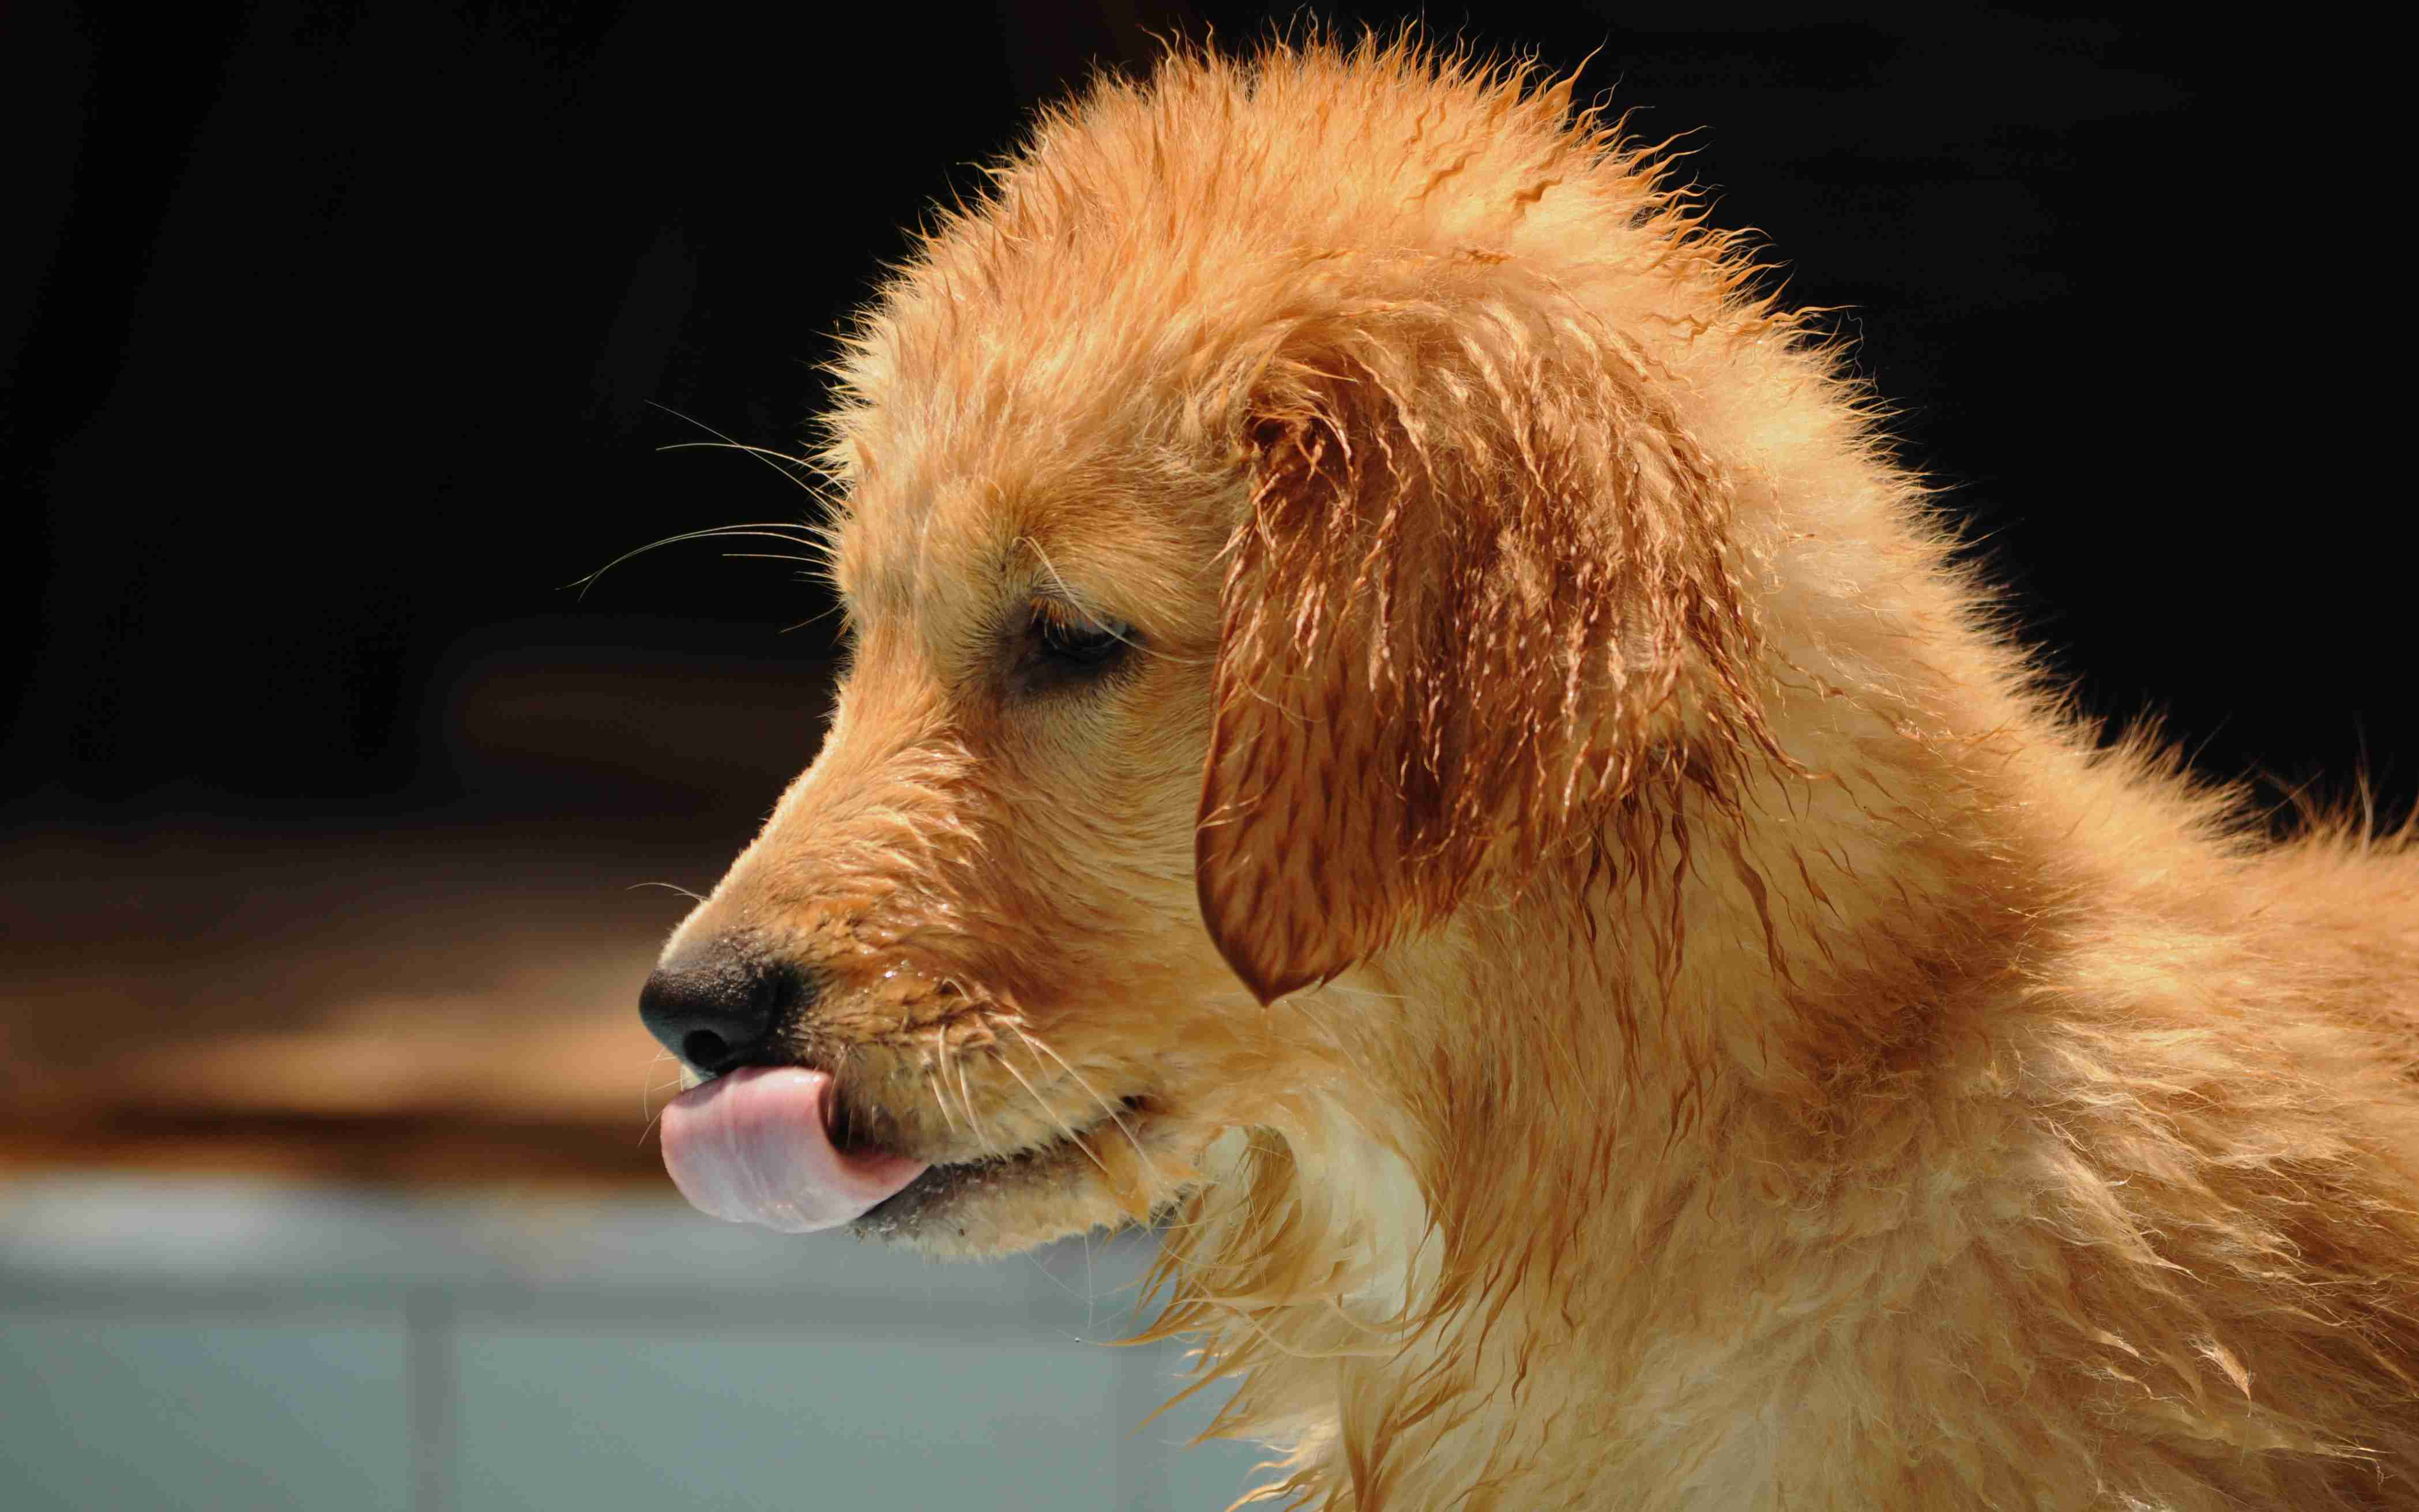 Are golden retrievers more prone to certain types of neurological conditions?